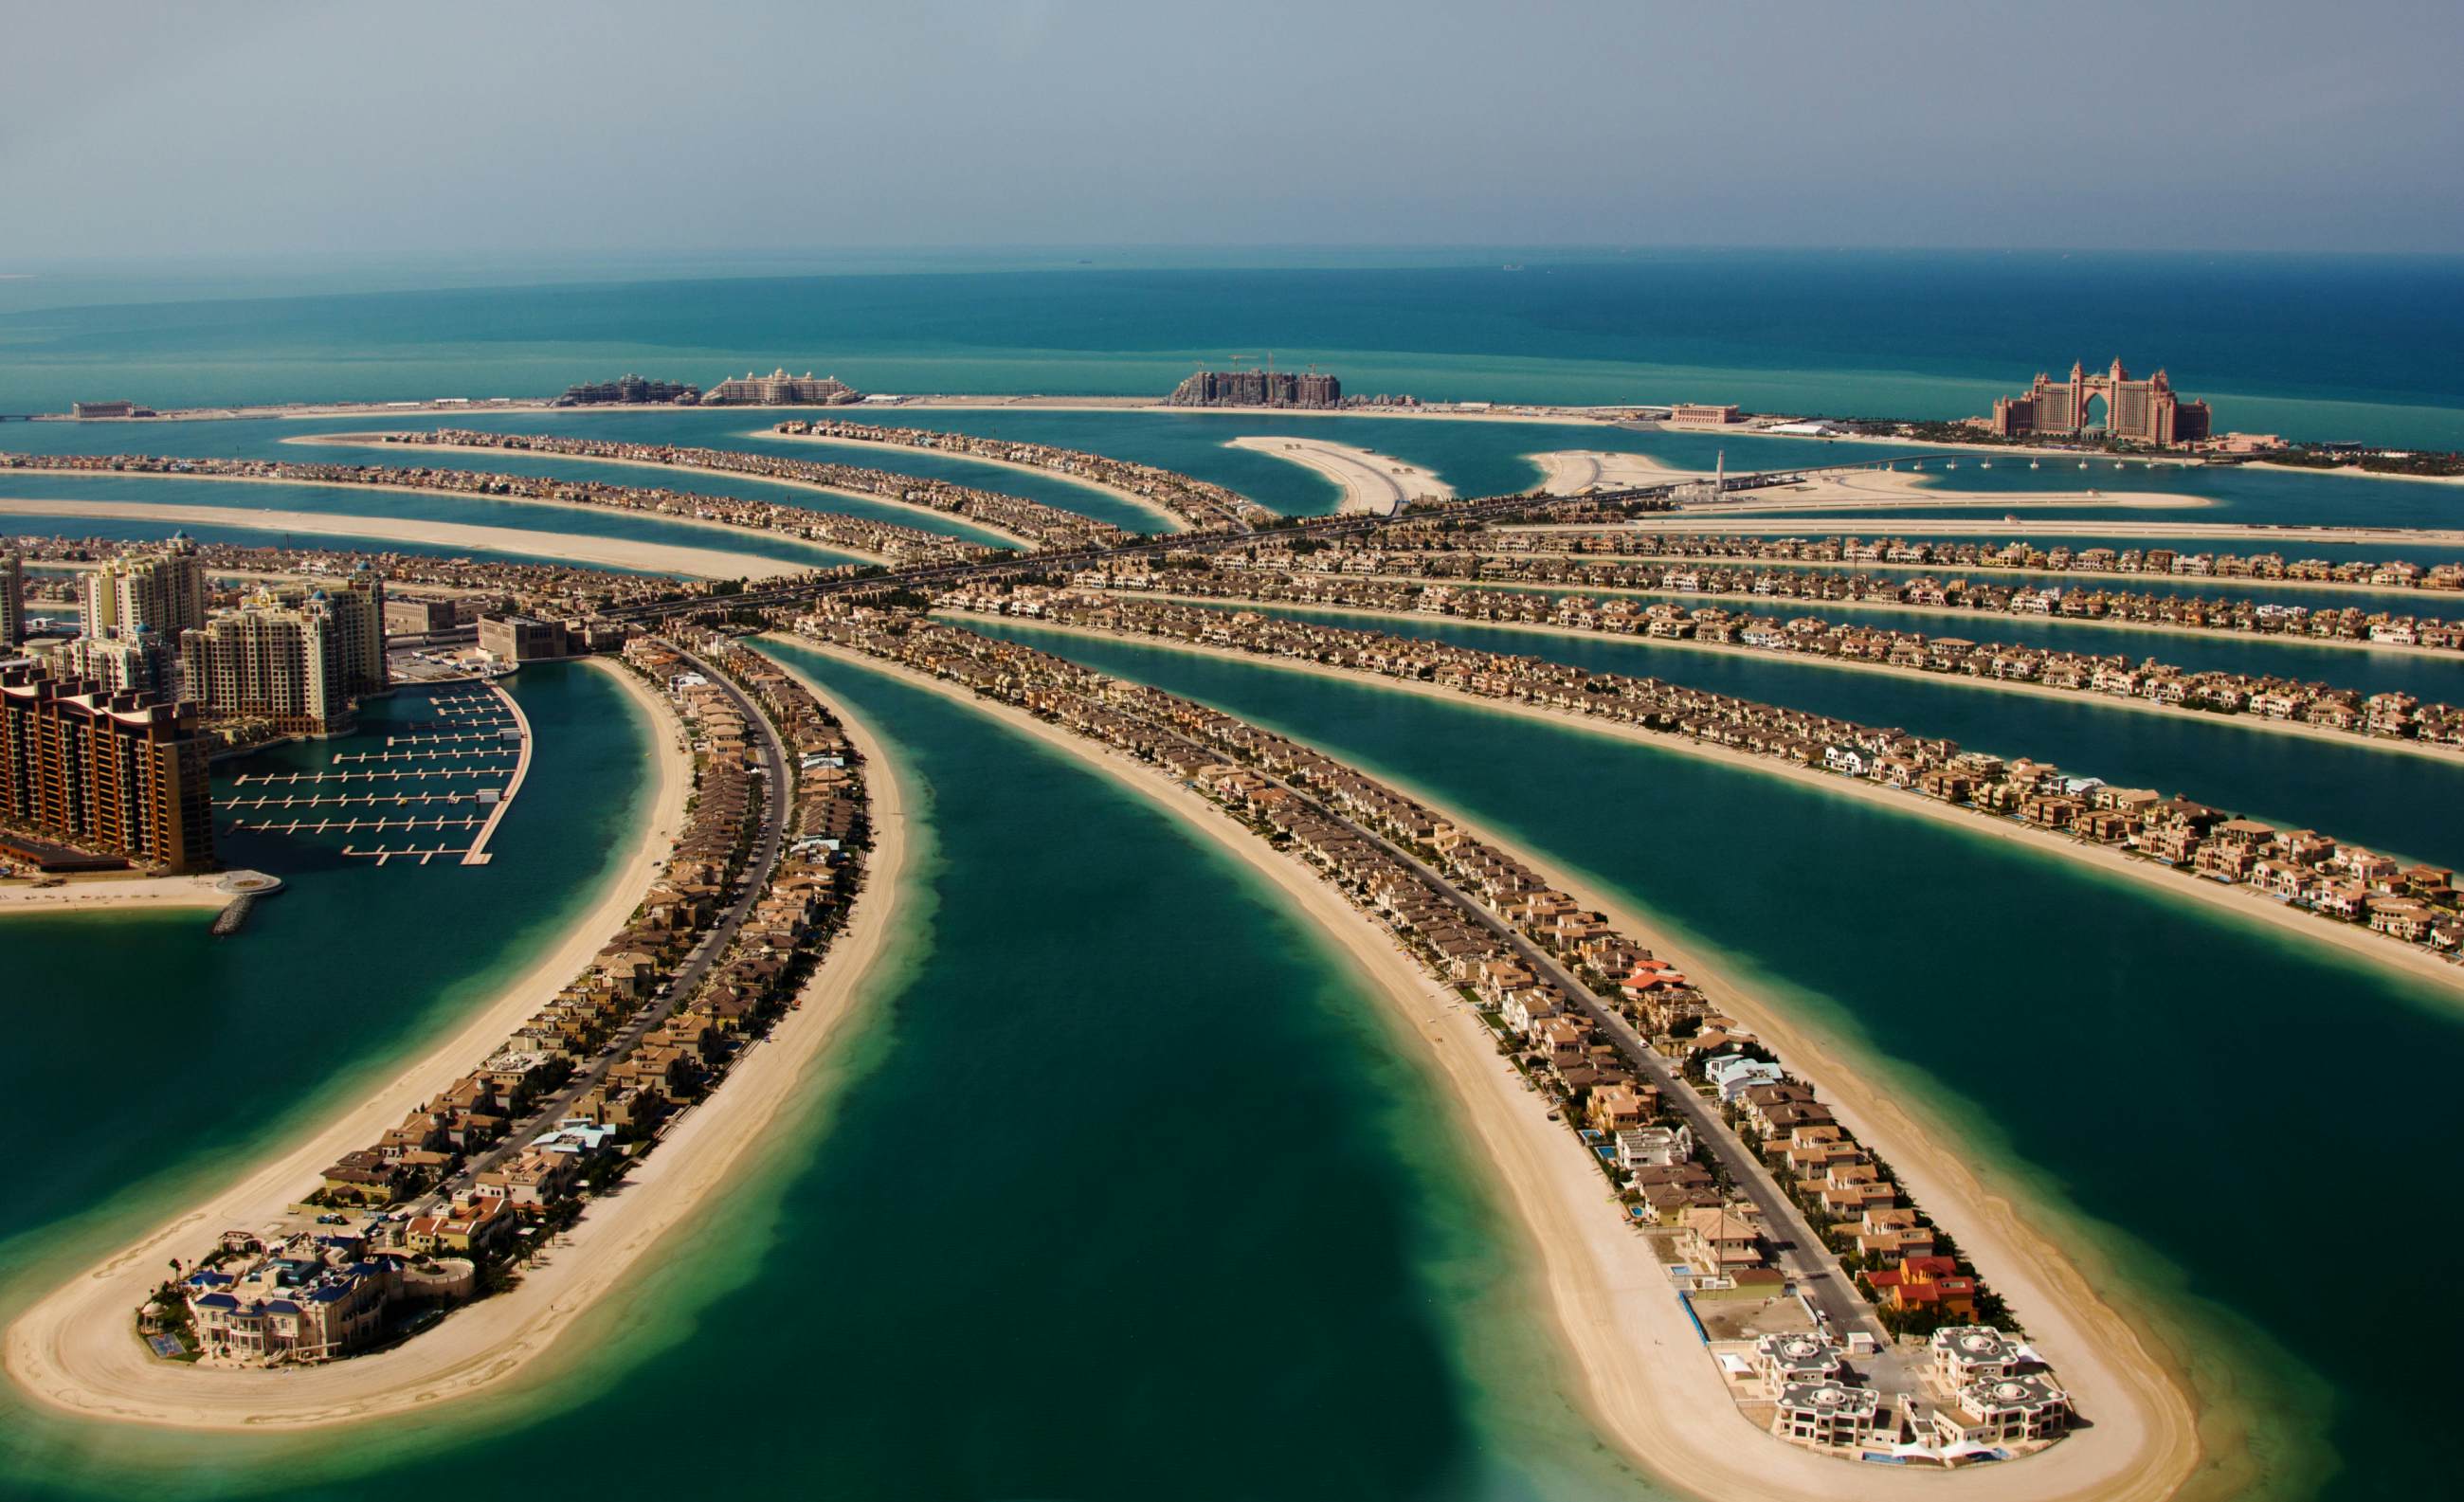 What Is The Cost Of Renting A Yacht In Dubai Marina?